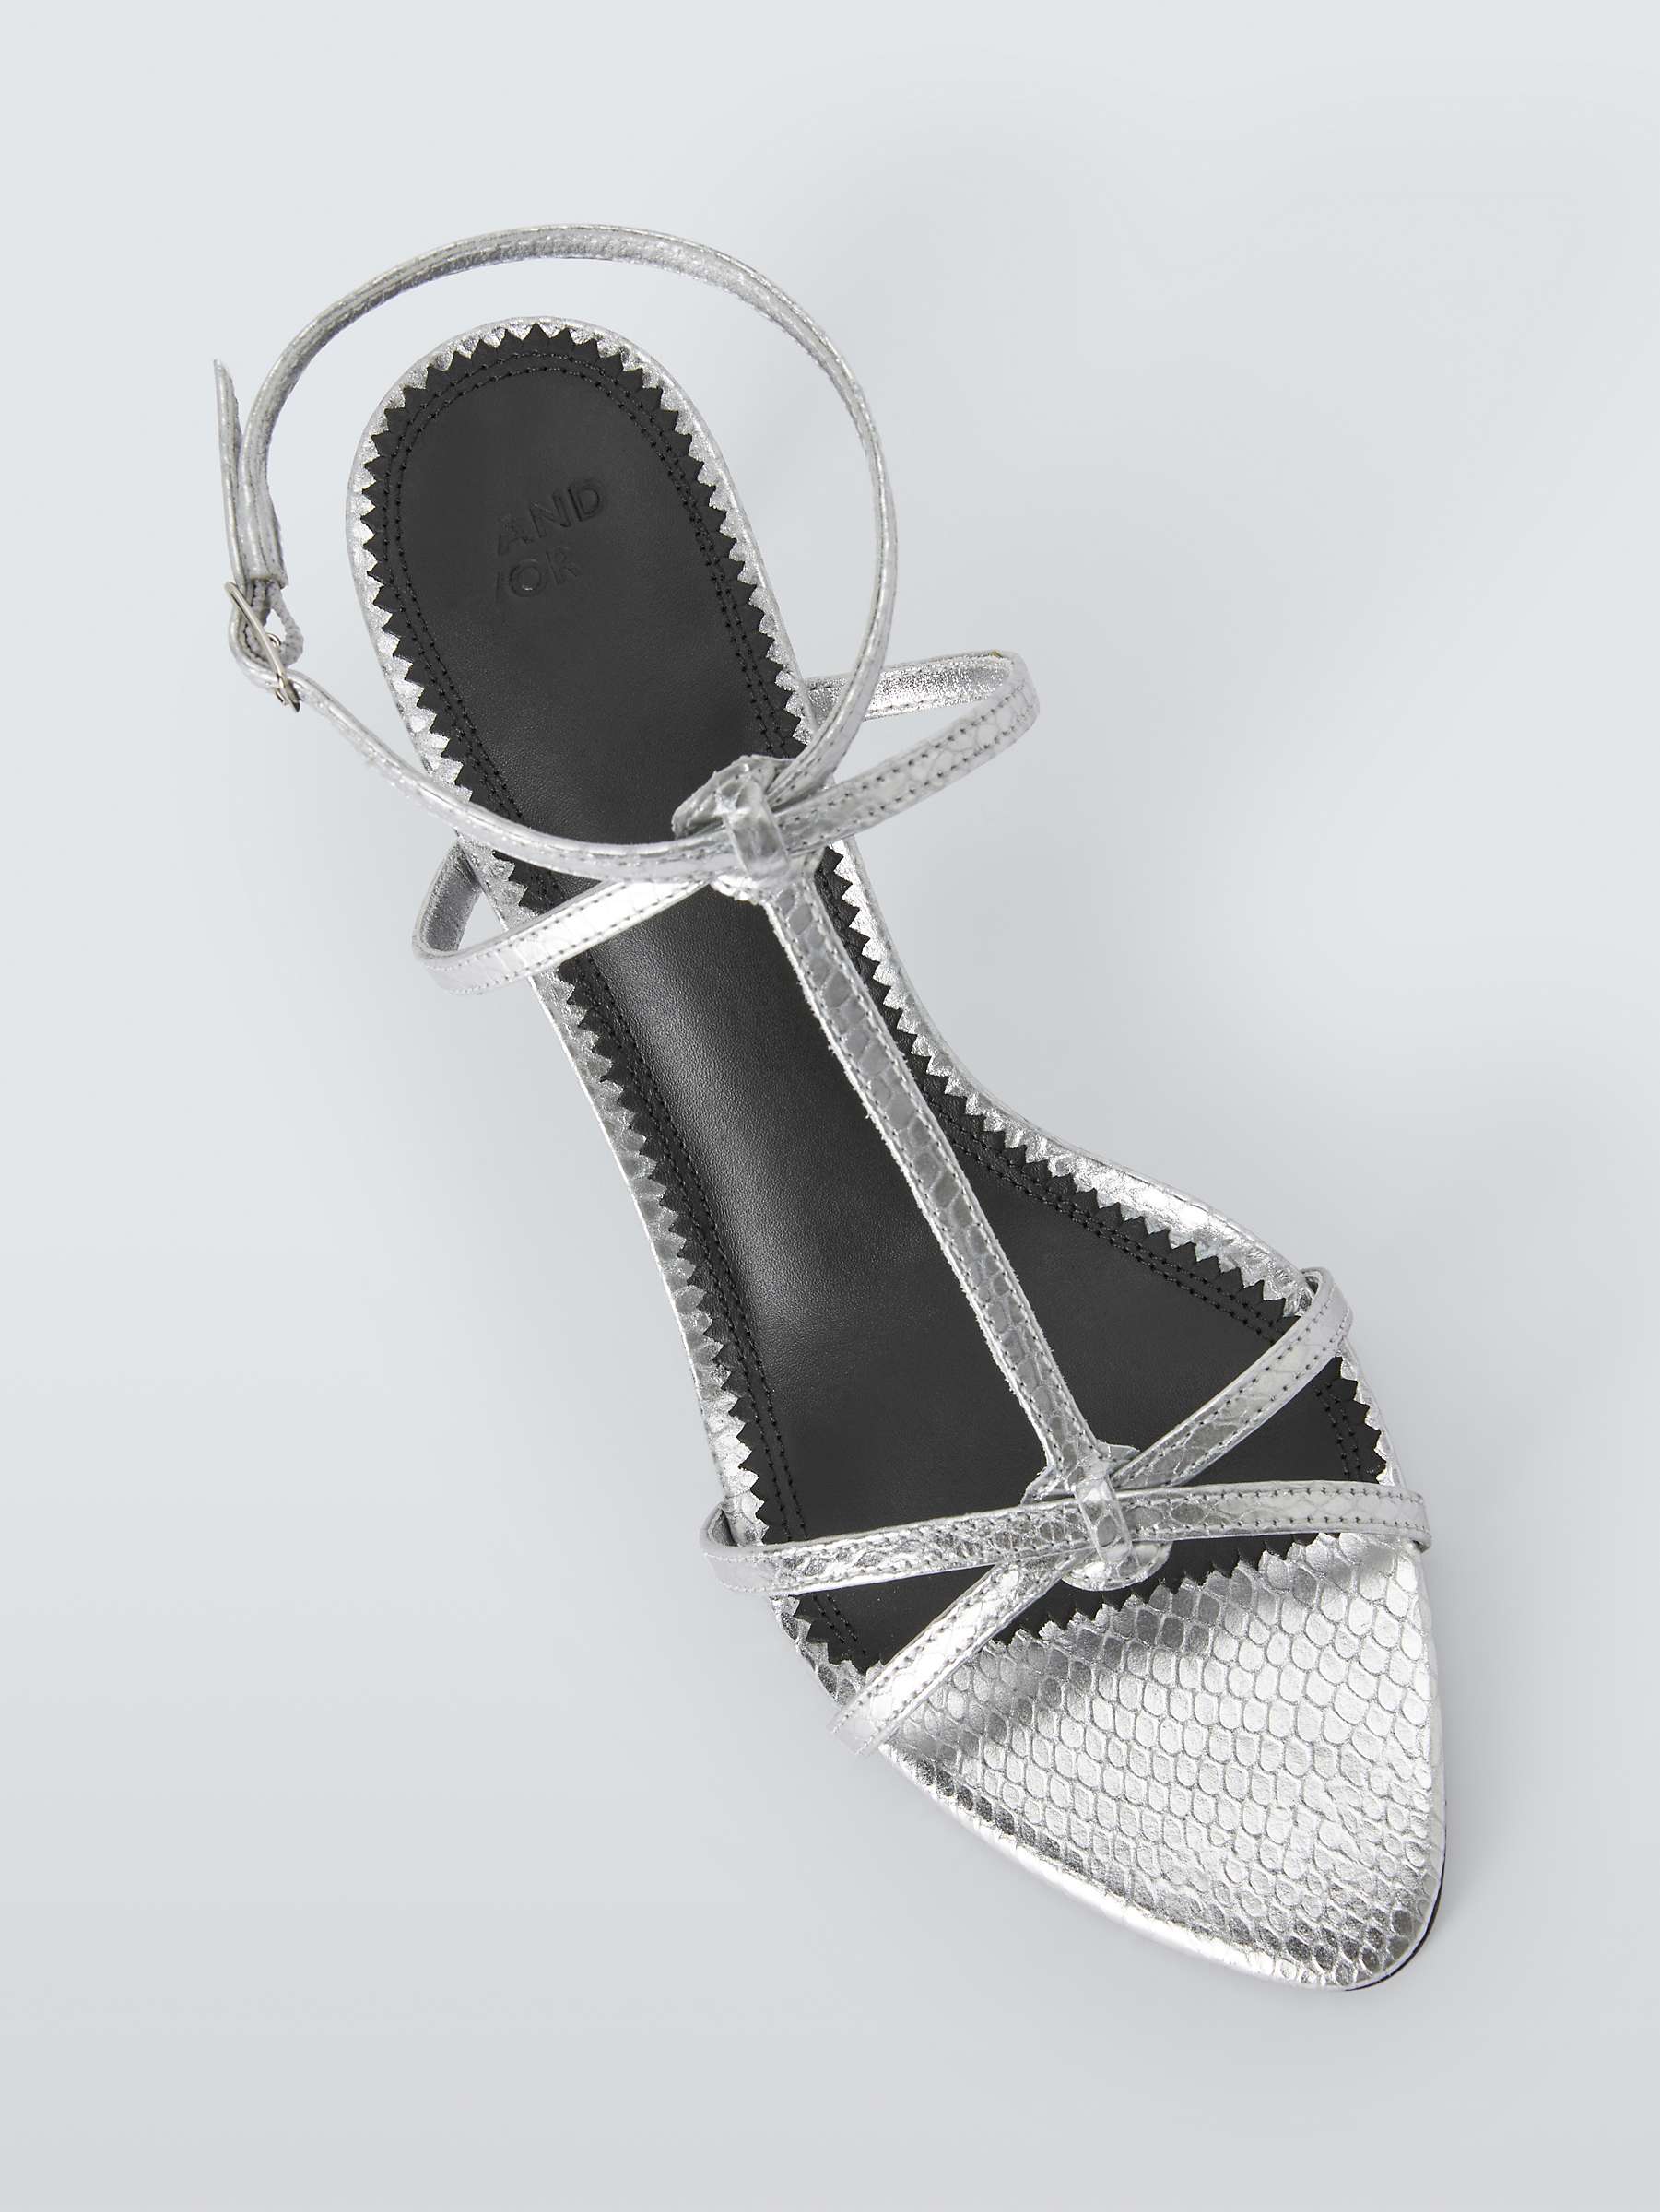 Buy AND/OR Mixie Leather T-Bar Pointed Dressy Sandals, Silver Snake Online at johnlewis.com